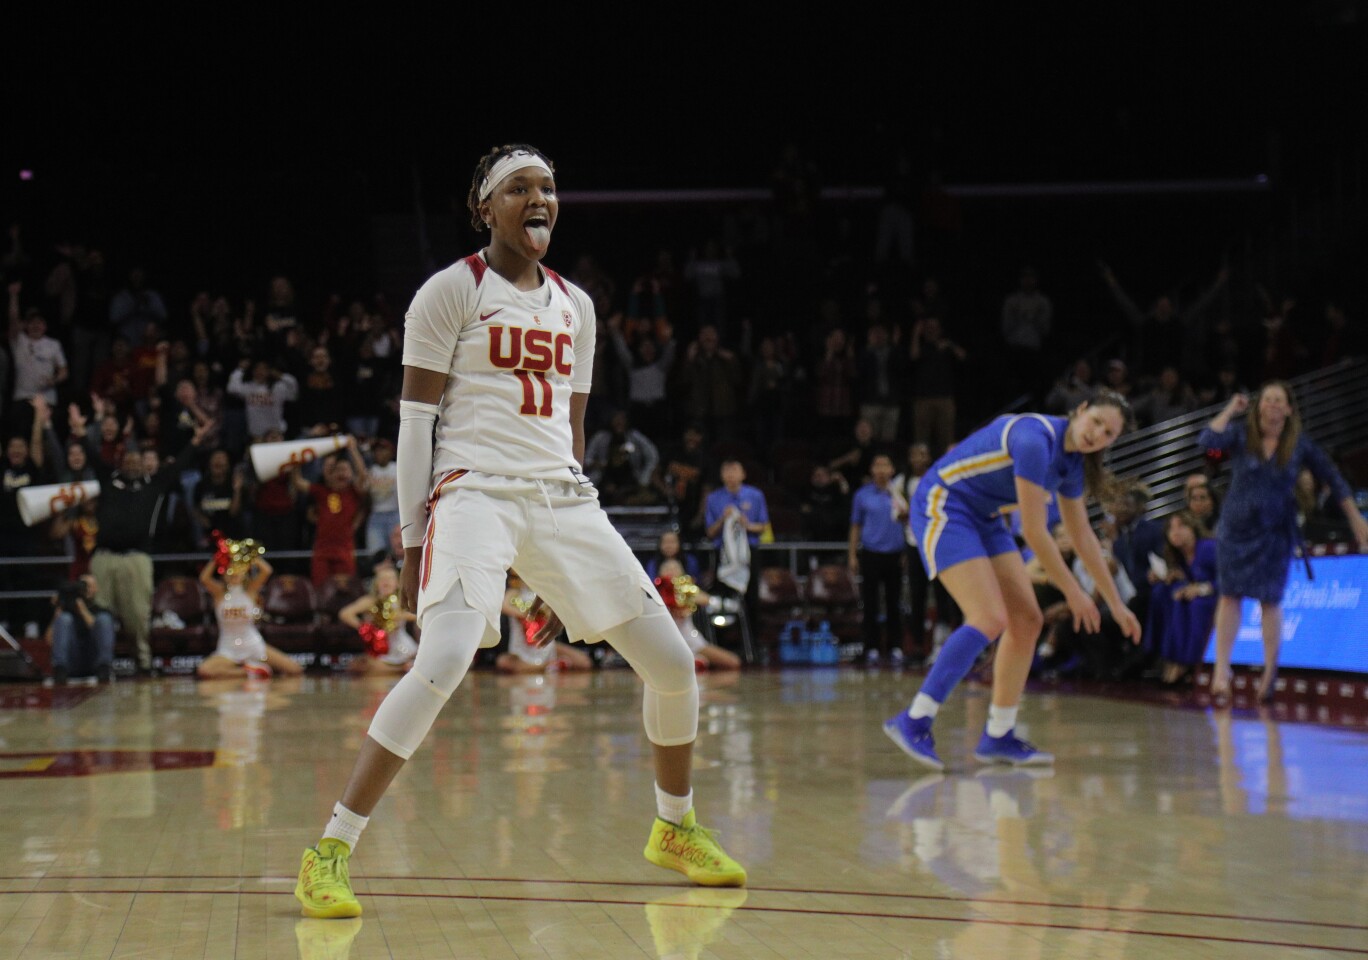 LOS ANGELES, CA - JANUARY 17, 2020: USC Trojans guard Aliyah Jeune (11) reacts after she scored to give USC the lead over UCLA with 19 seconds left in overtime at Galen Center on January 17, 2020 in Los Angeles, California. (Gina Ferazzi/Los AngelesTimes)